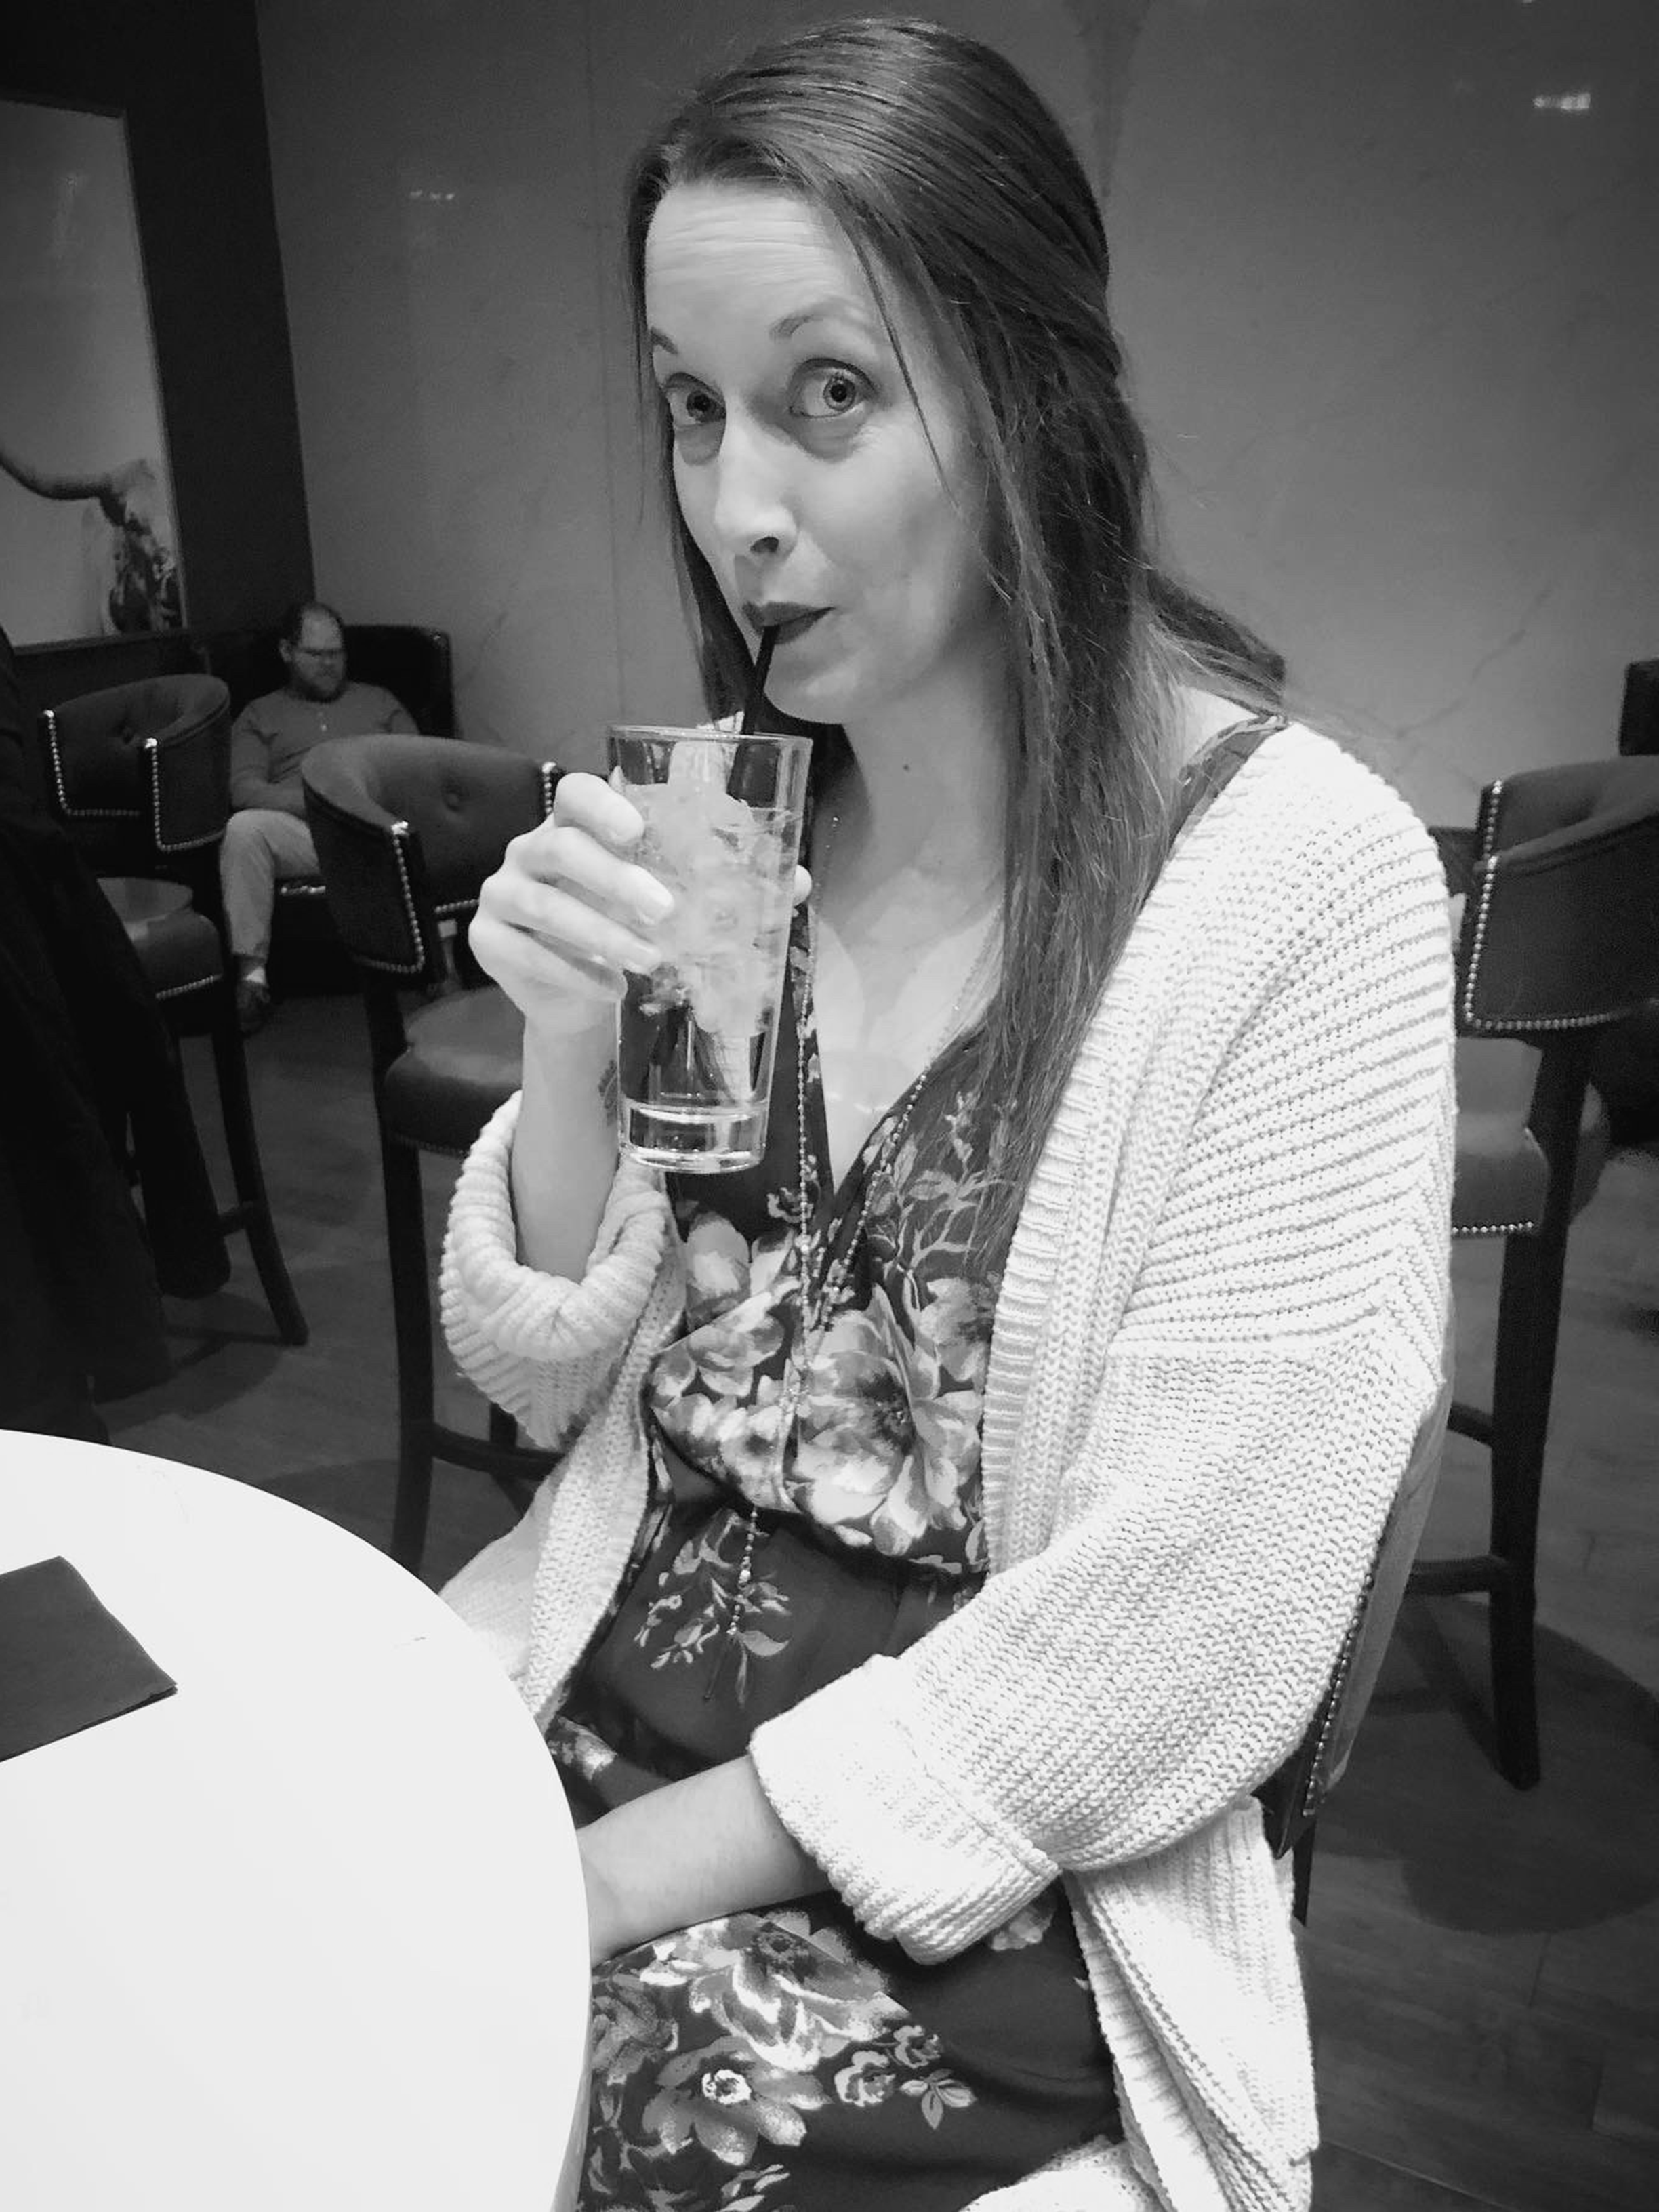 Katy Williams sipping from drink with straw in downtown Indy restaurant